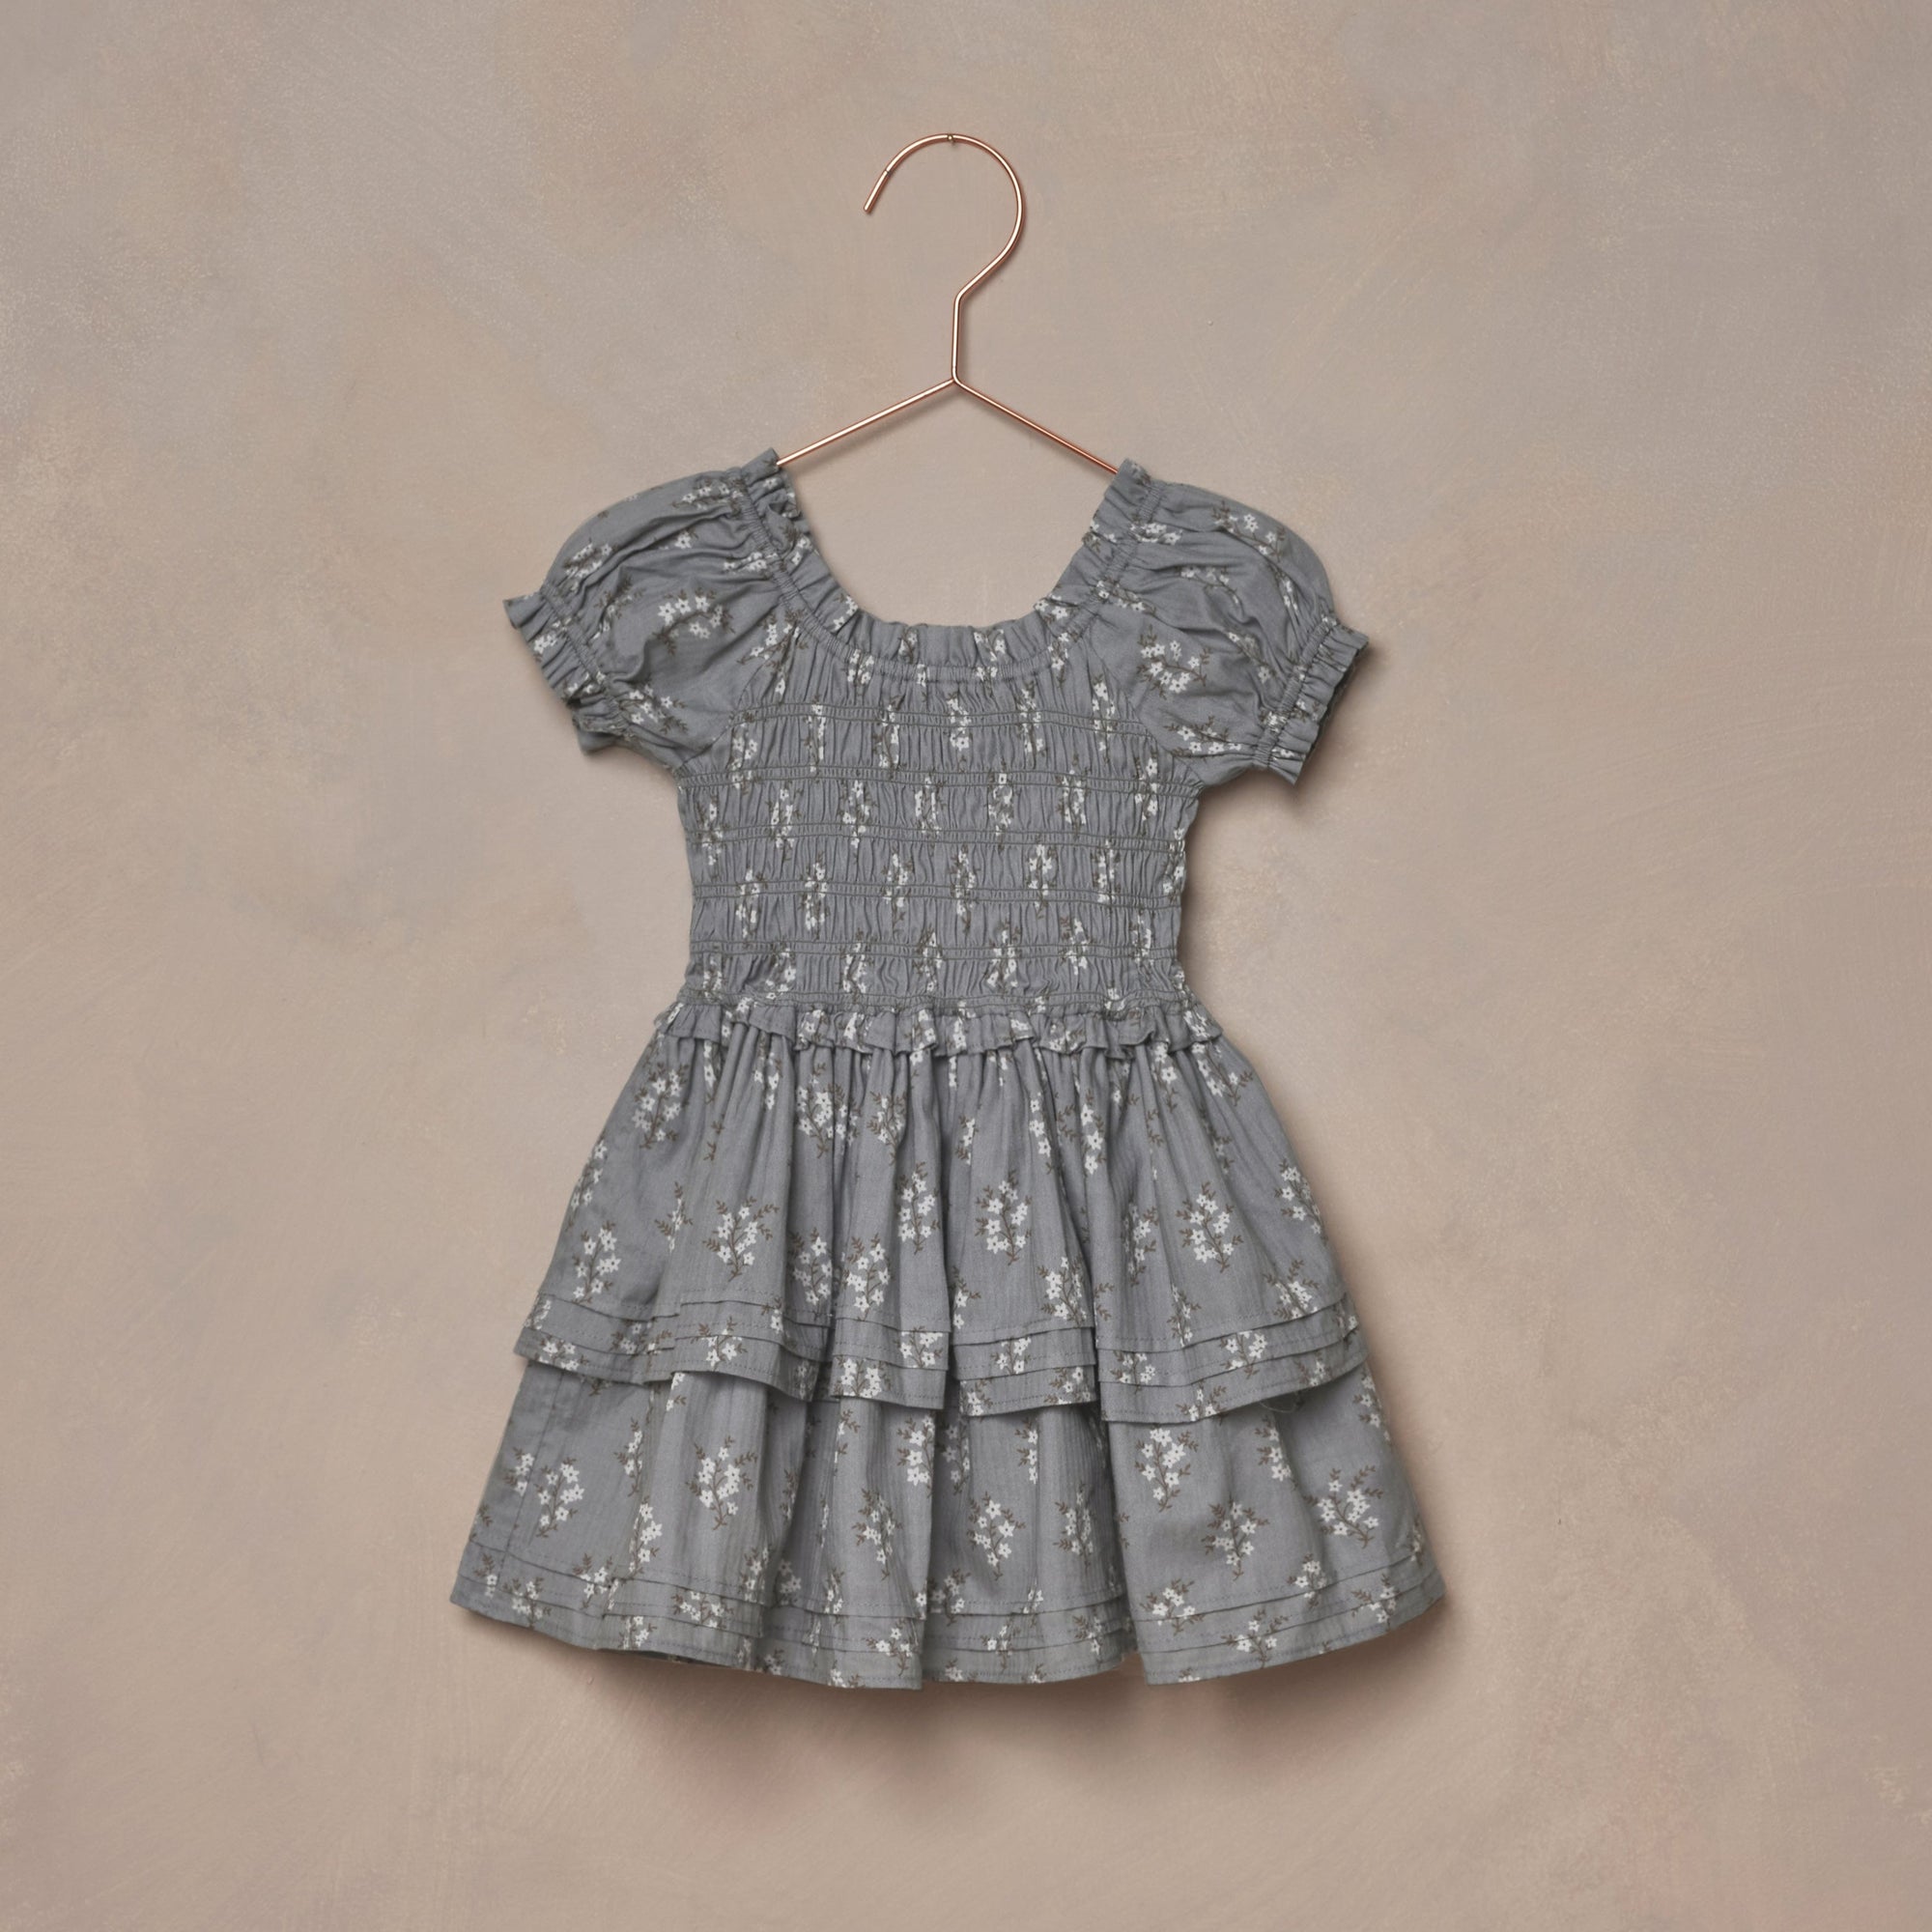 Cosette Dress - Provence-Dress-Nora Lee-2-Little Soldiers